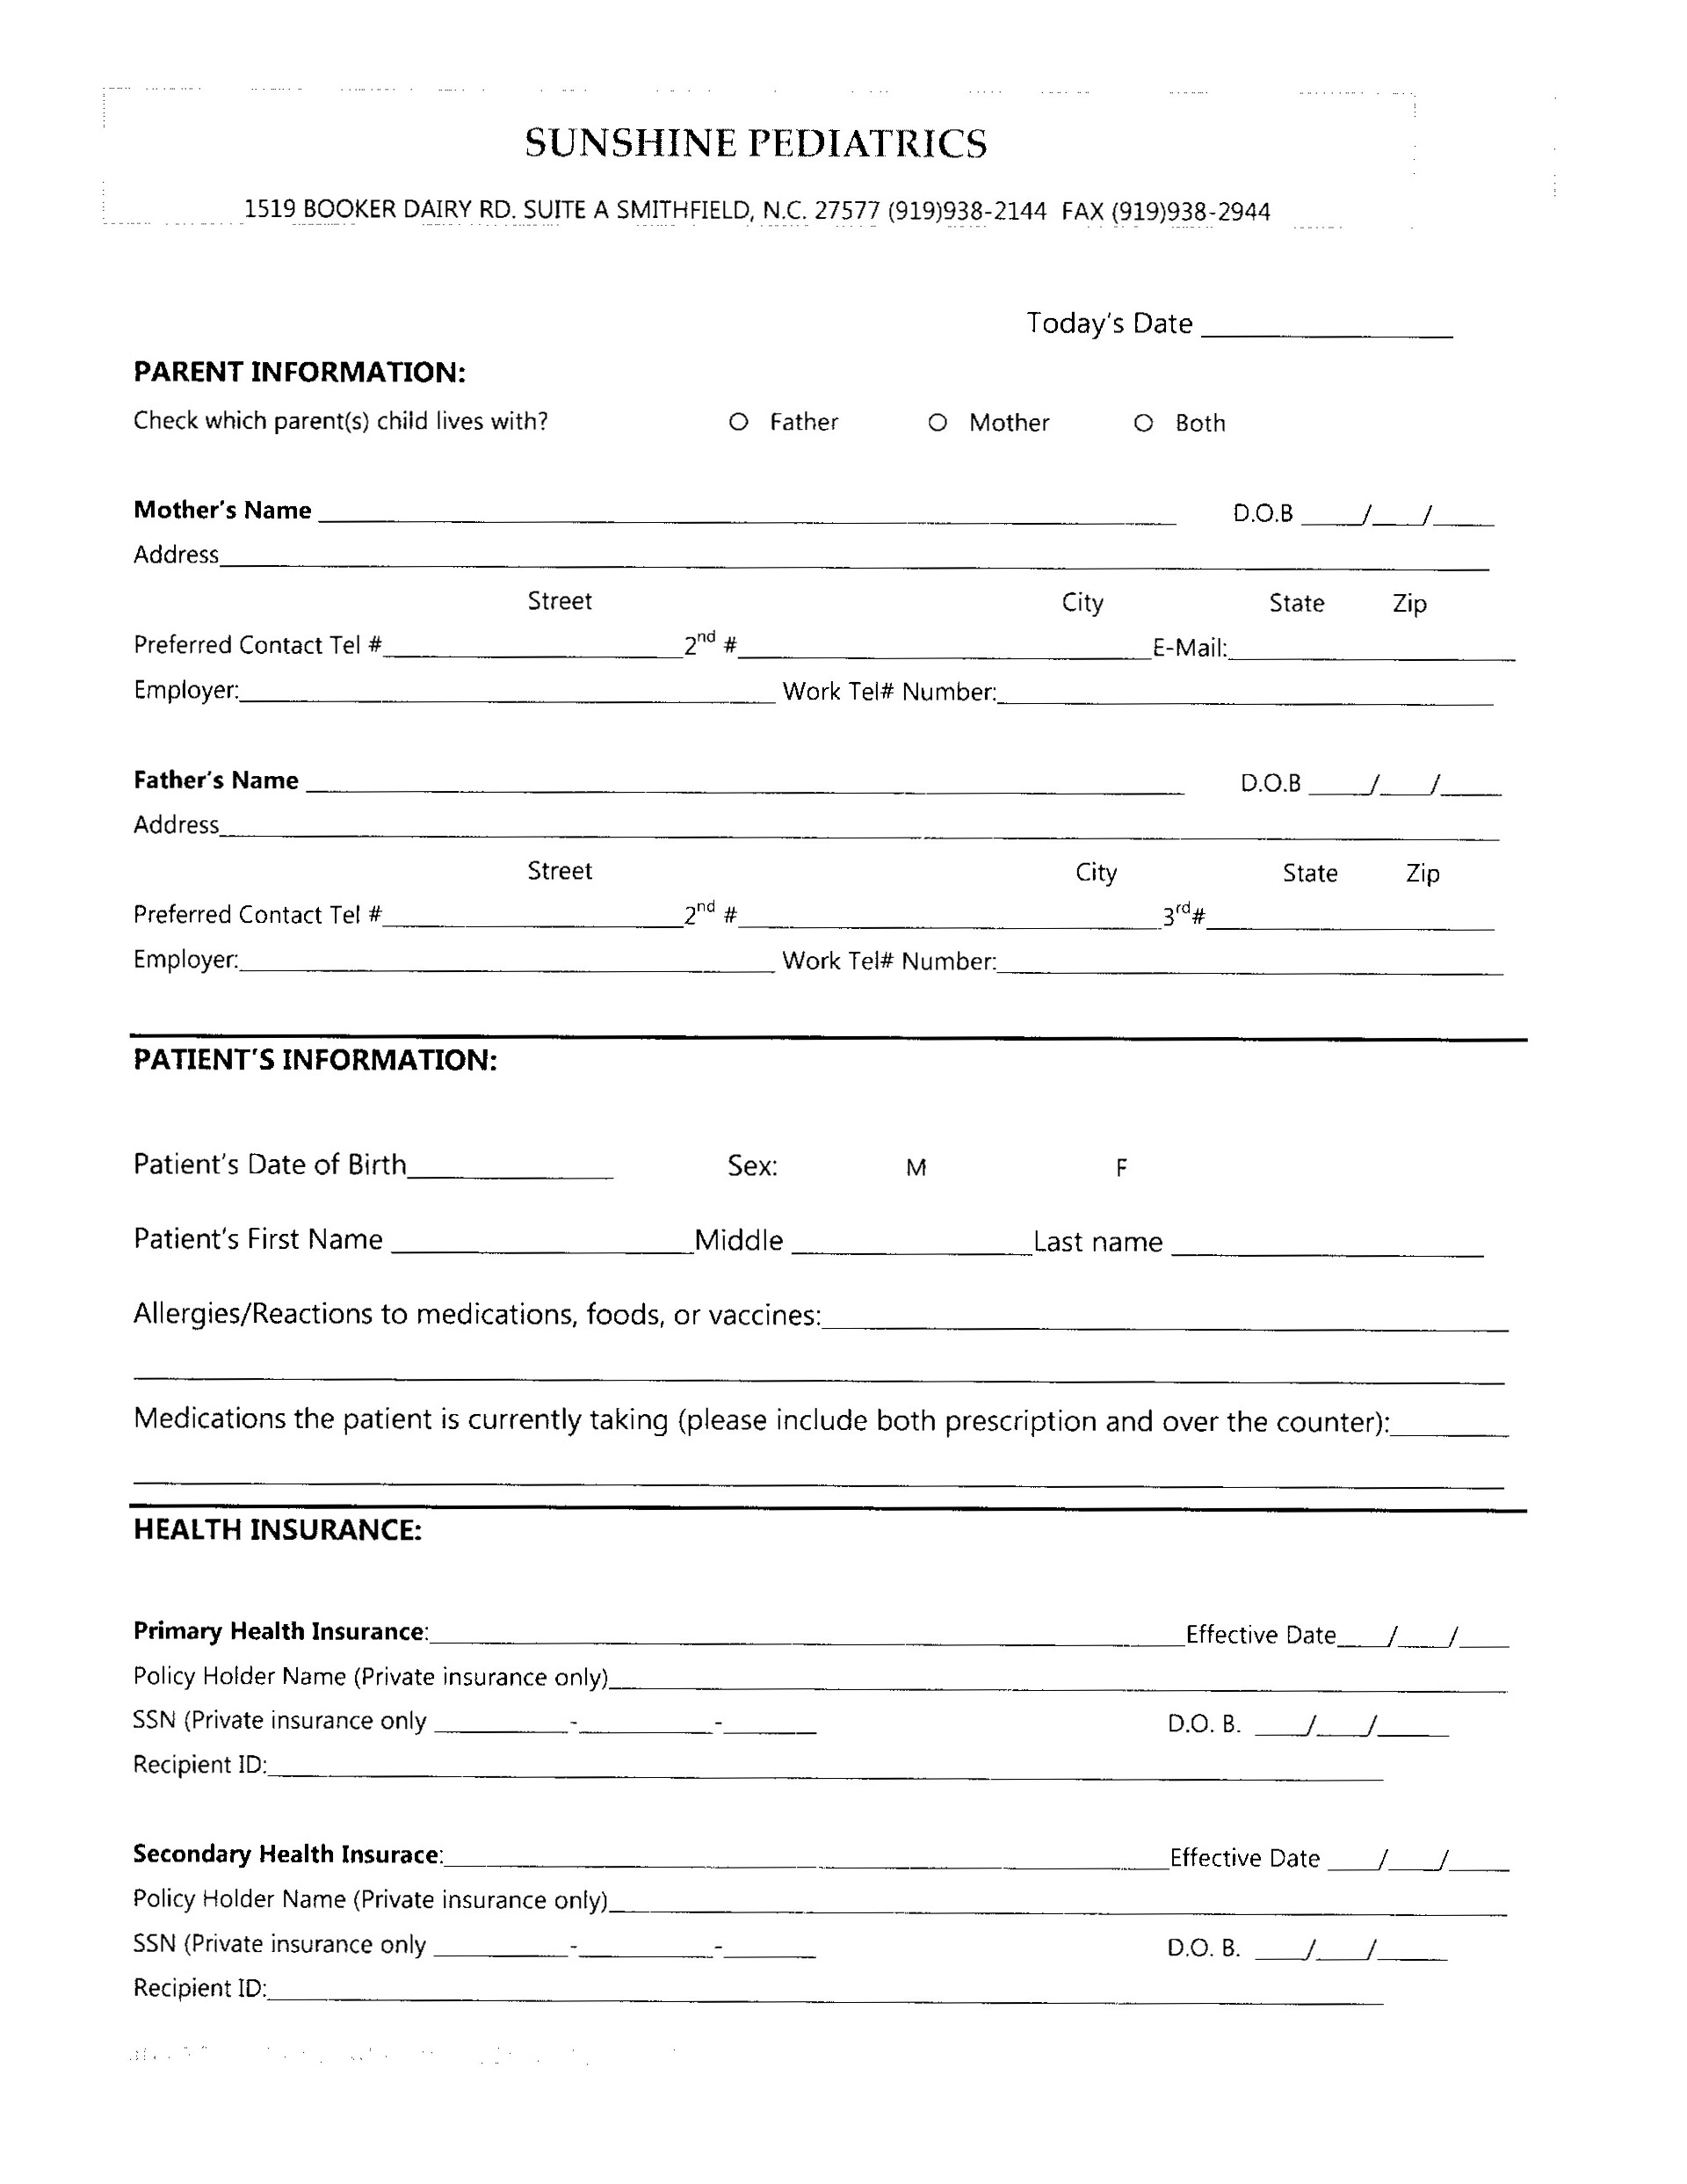 new patient form - english